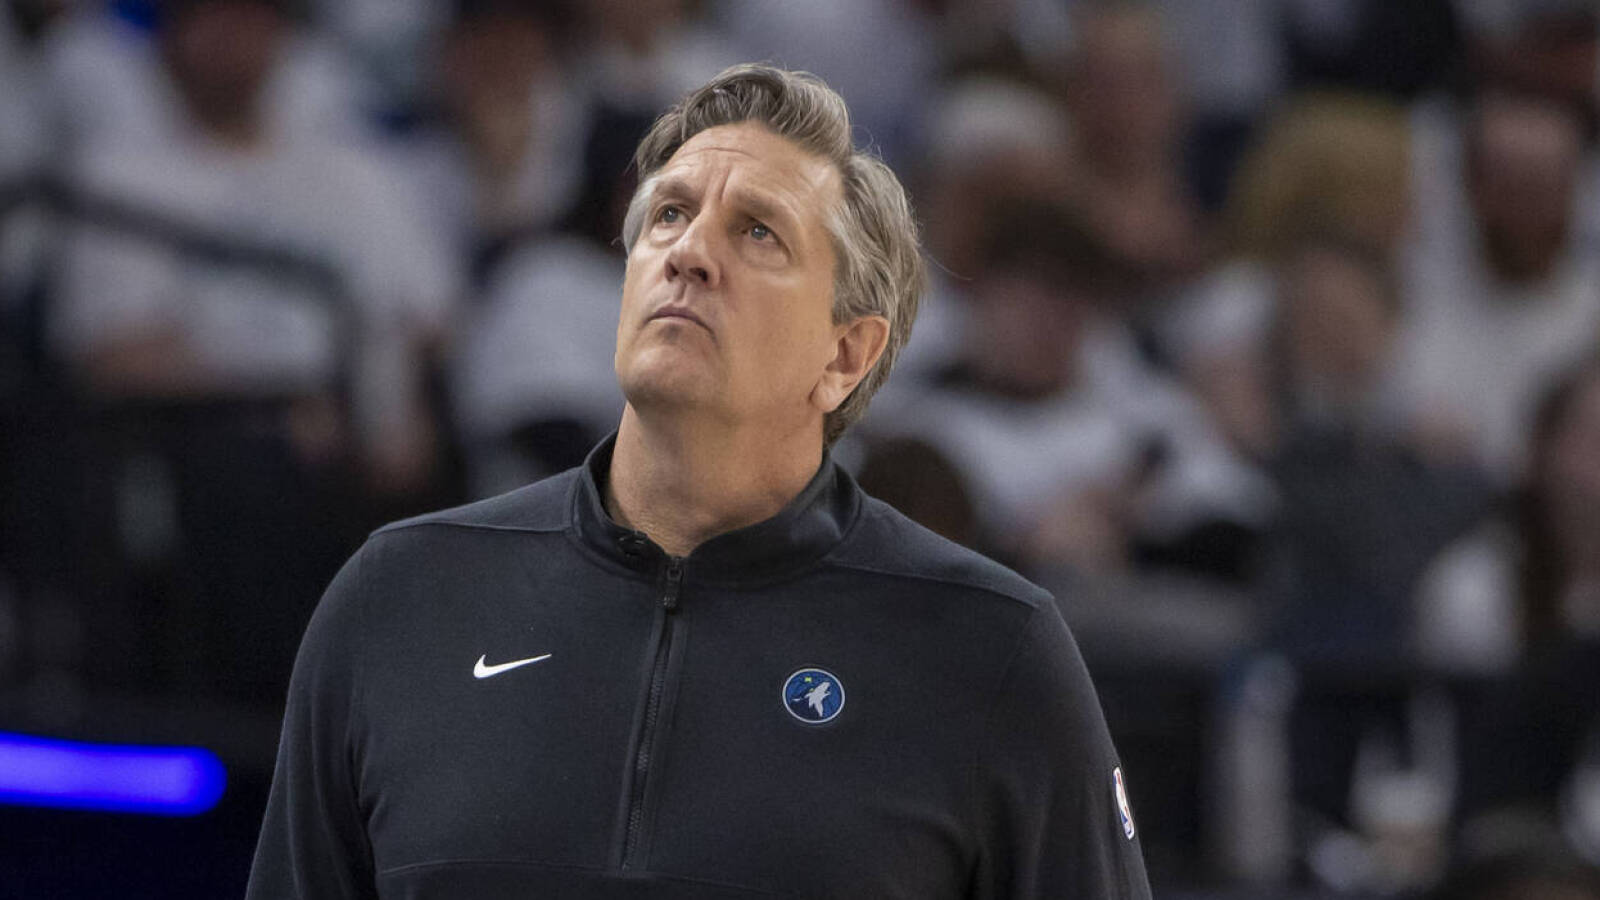 Timberwolves coach Chris Finch to undergo surgery after sideline collision